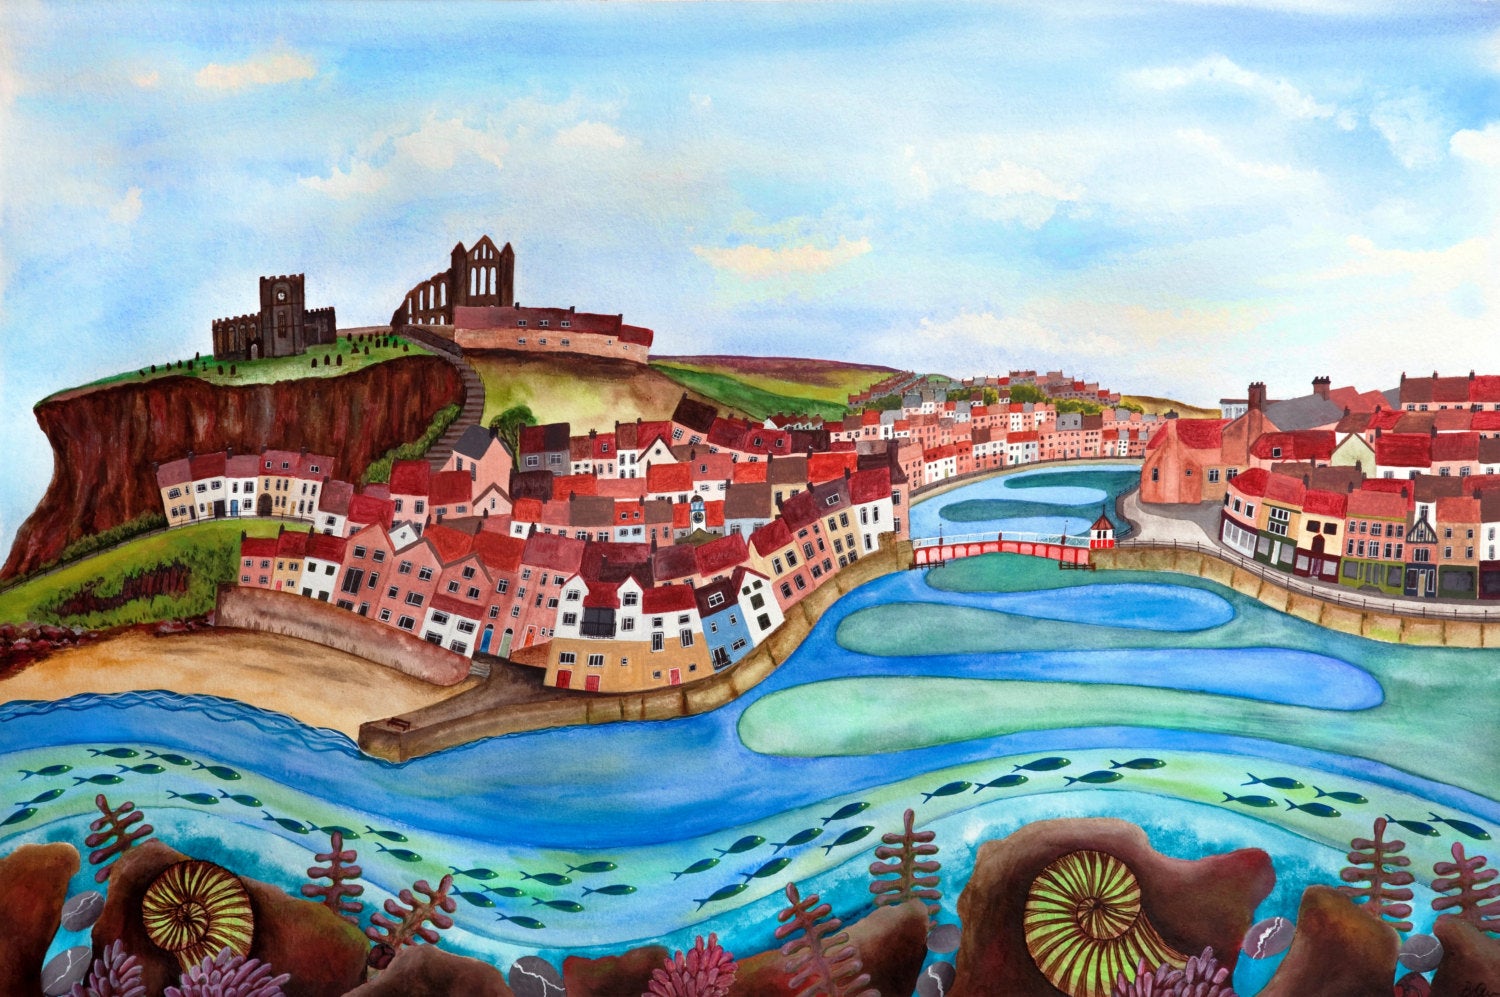 Sitting Pretty - Whitby - Limited Edition Print